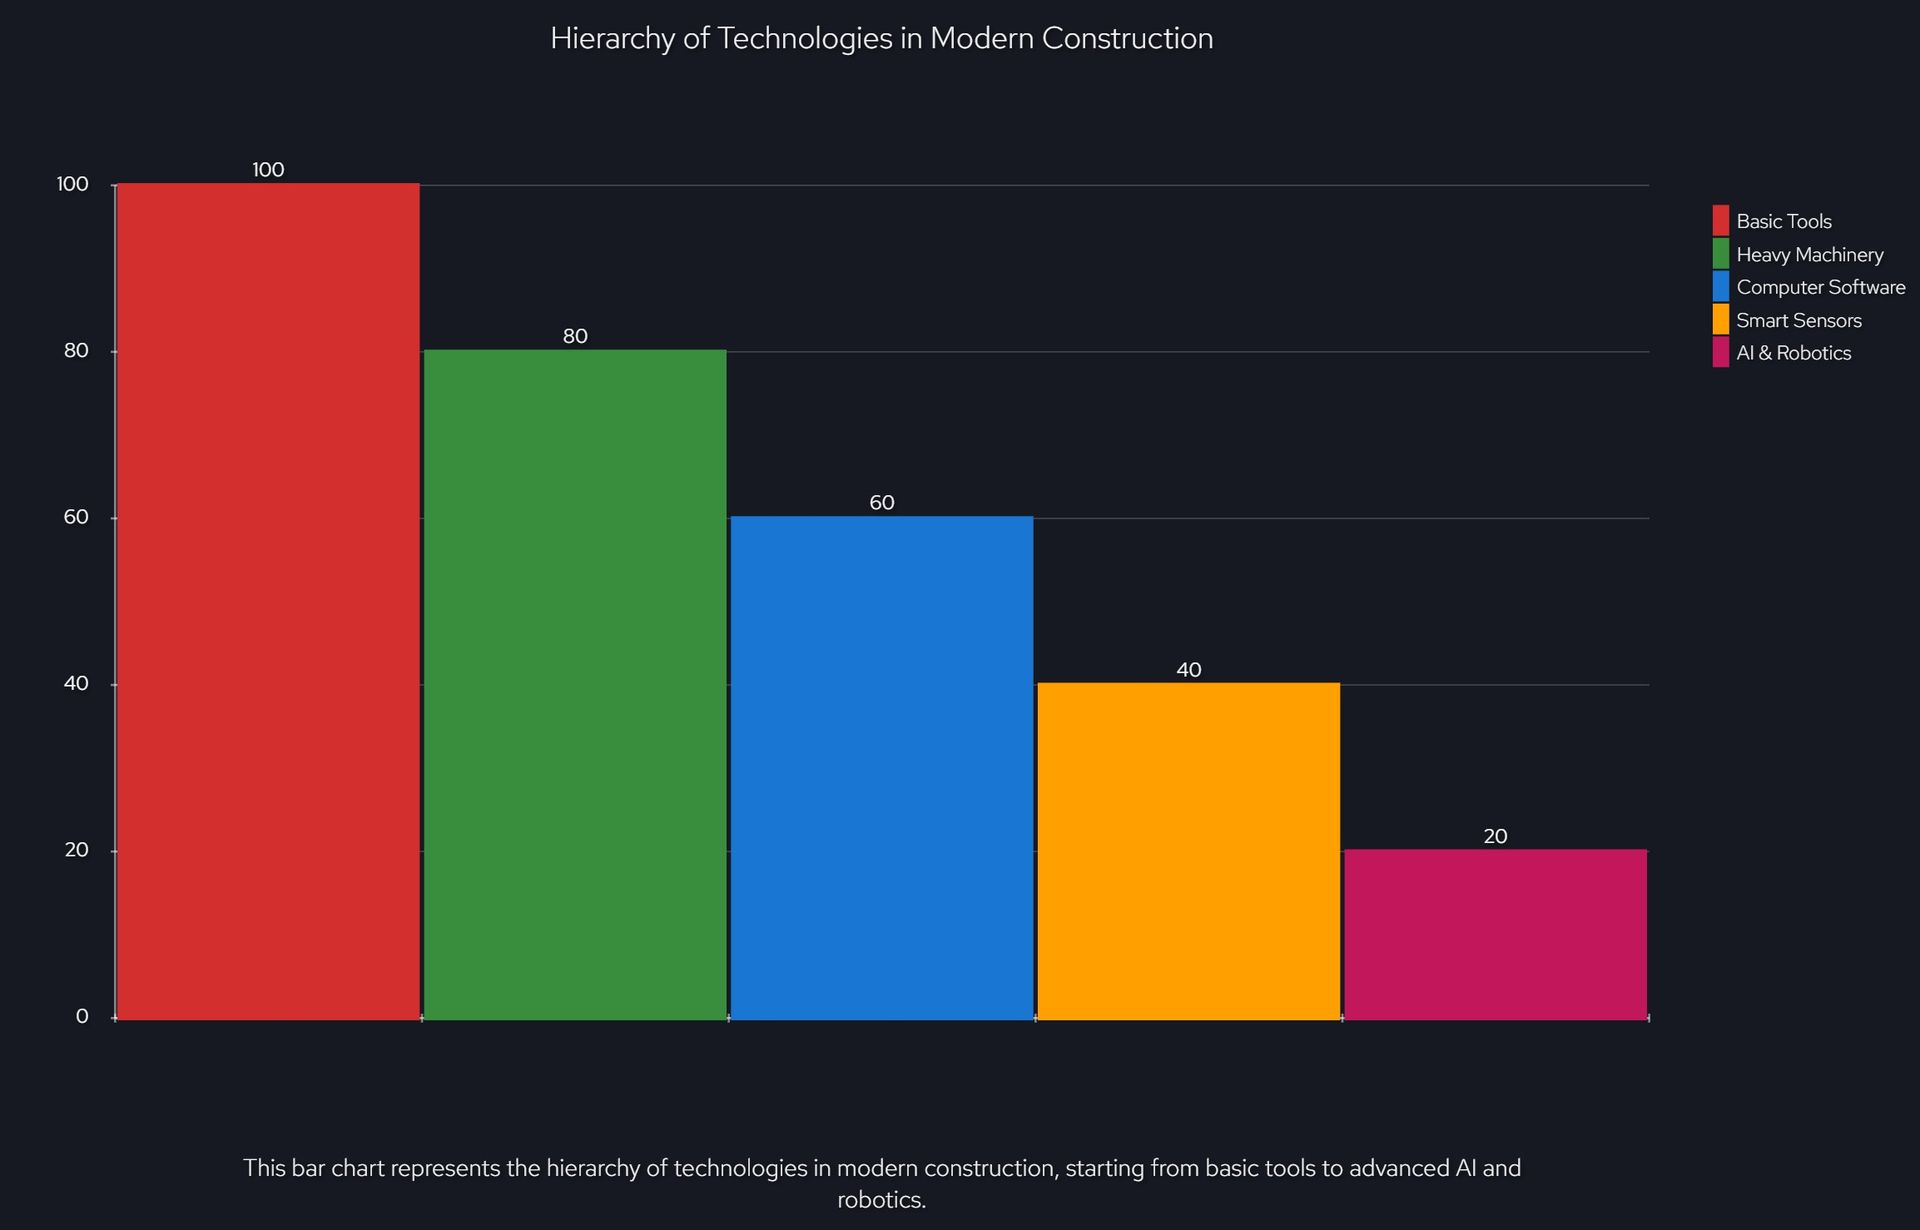 This bar chart represents the hierarchy of technologies in modern construction, starting from basic tools to advanced AI and robotics.